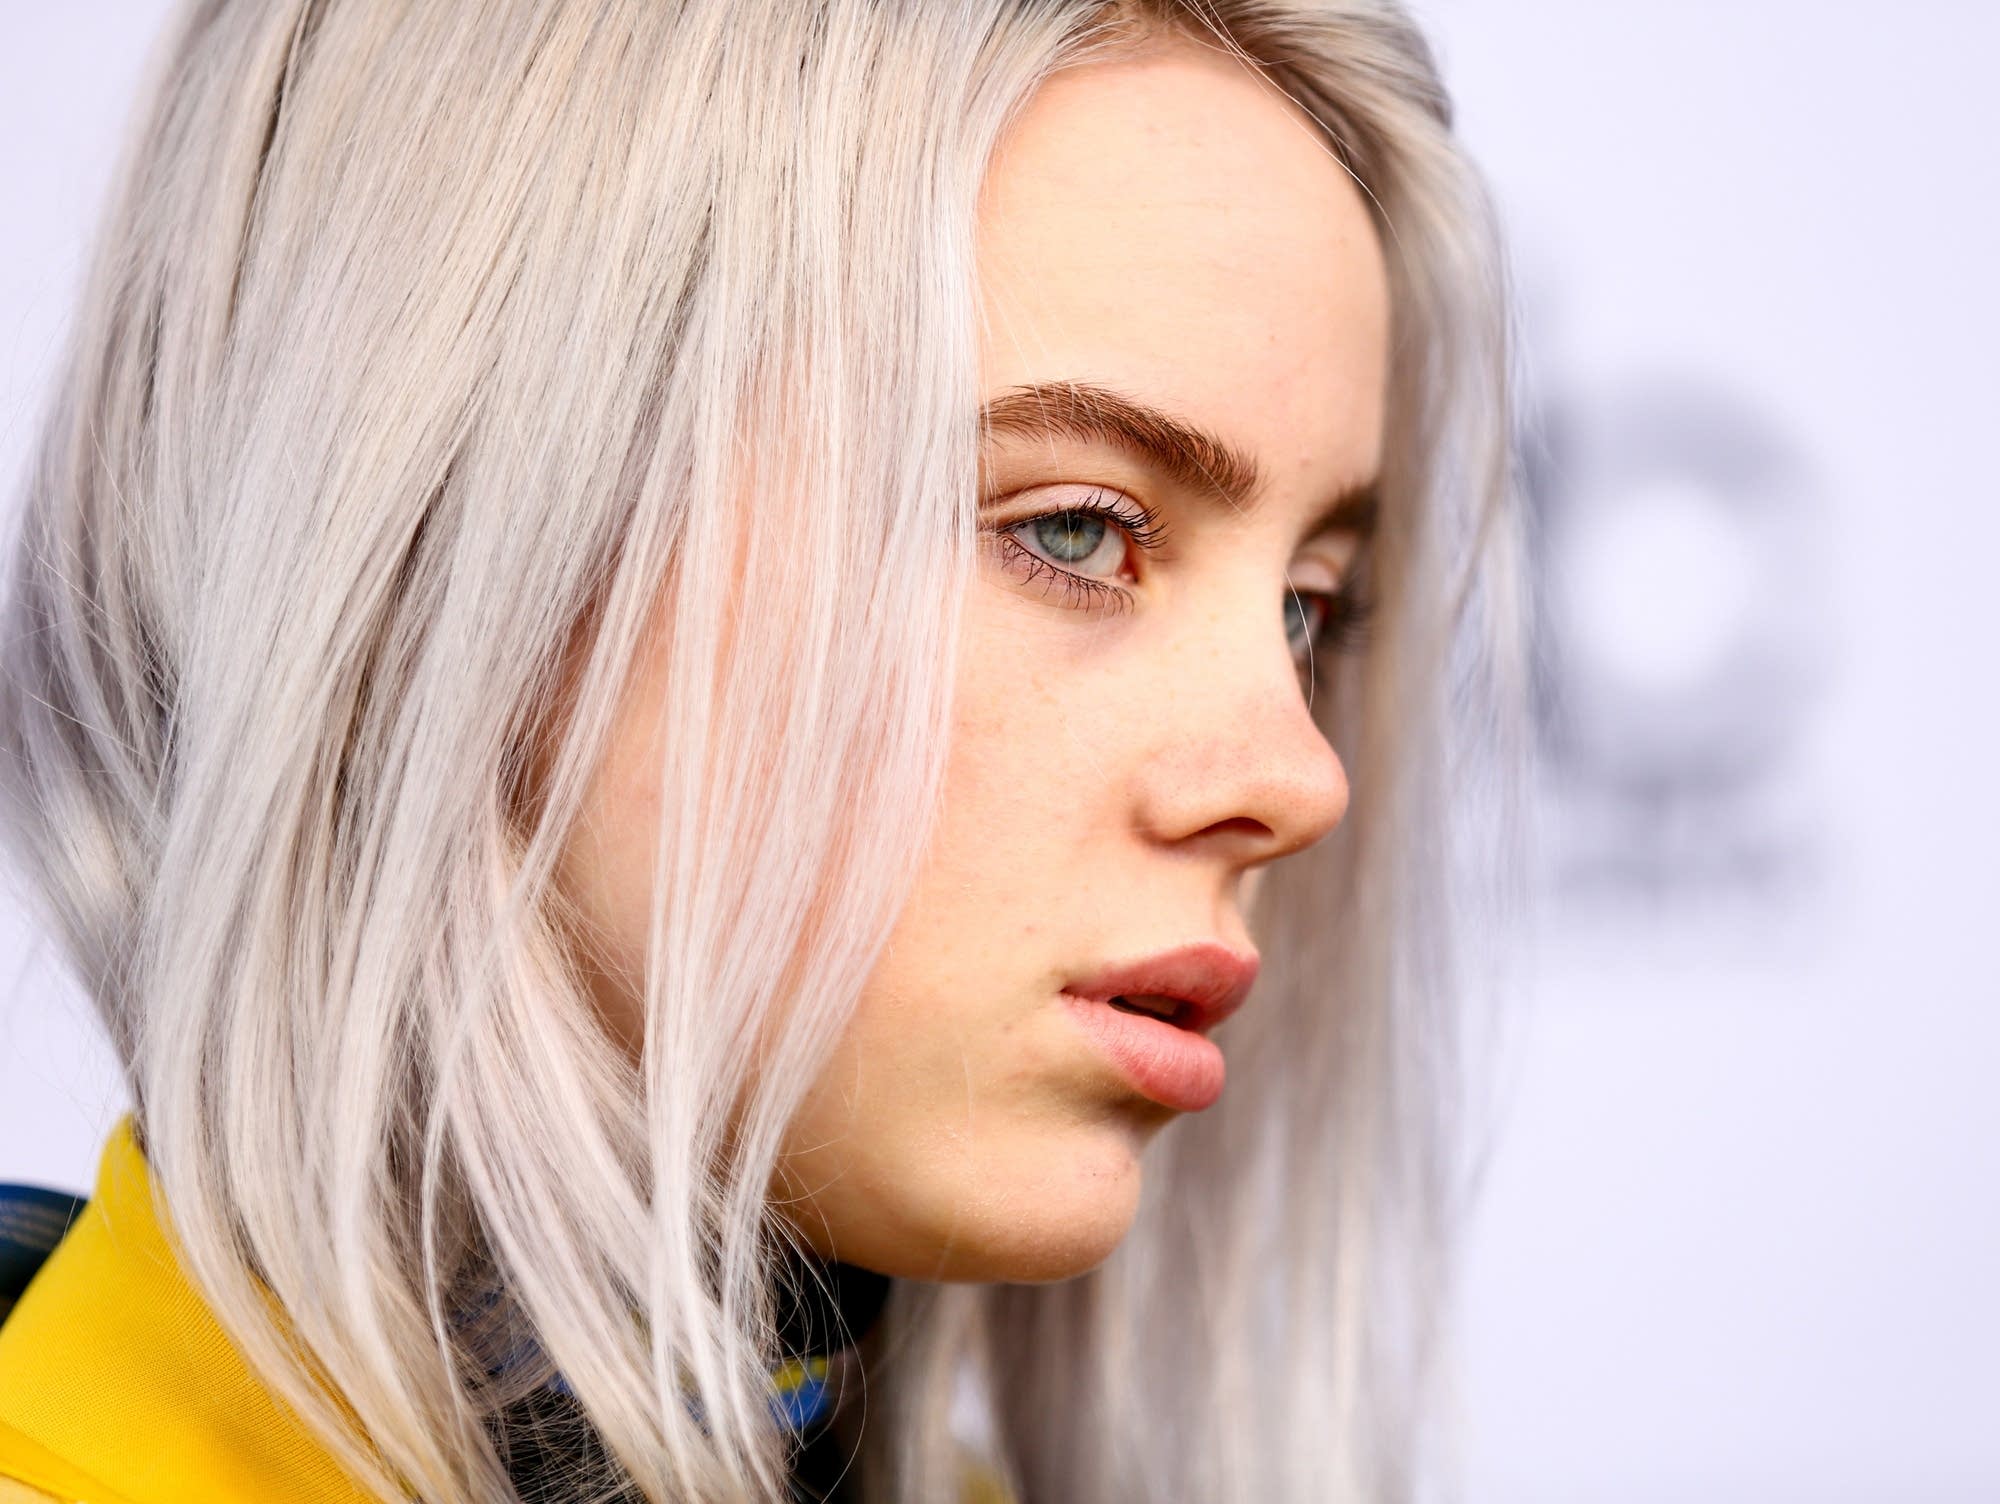 Billie Eilish Opens Up About Her Mental Health And Has Some Great